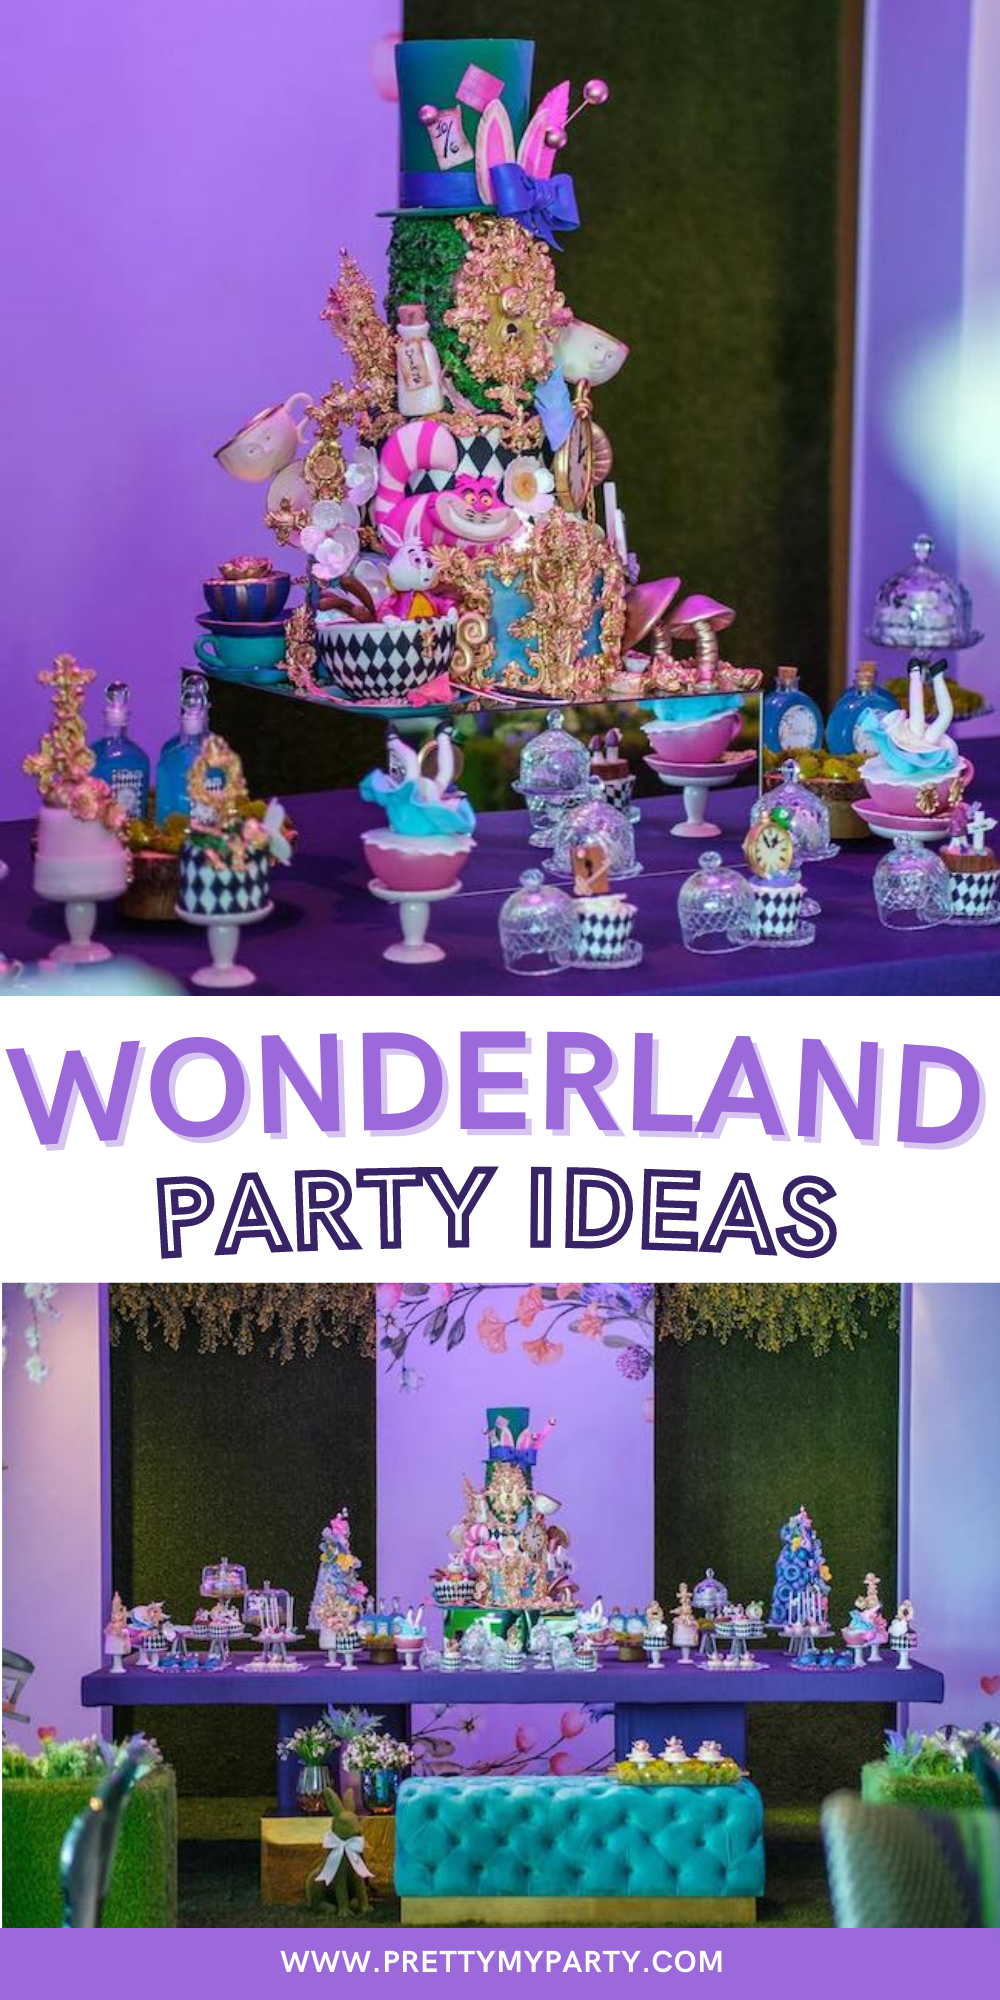 https://www.prettymyparty.com/wp-content/uploads/2022/04/Alice-In-Wonderland-Party-Pretty-My-Party.png